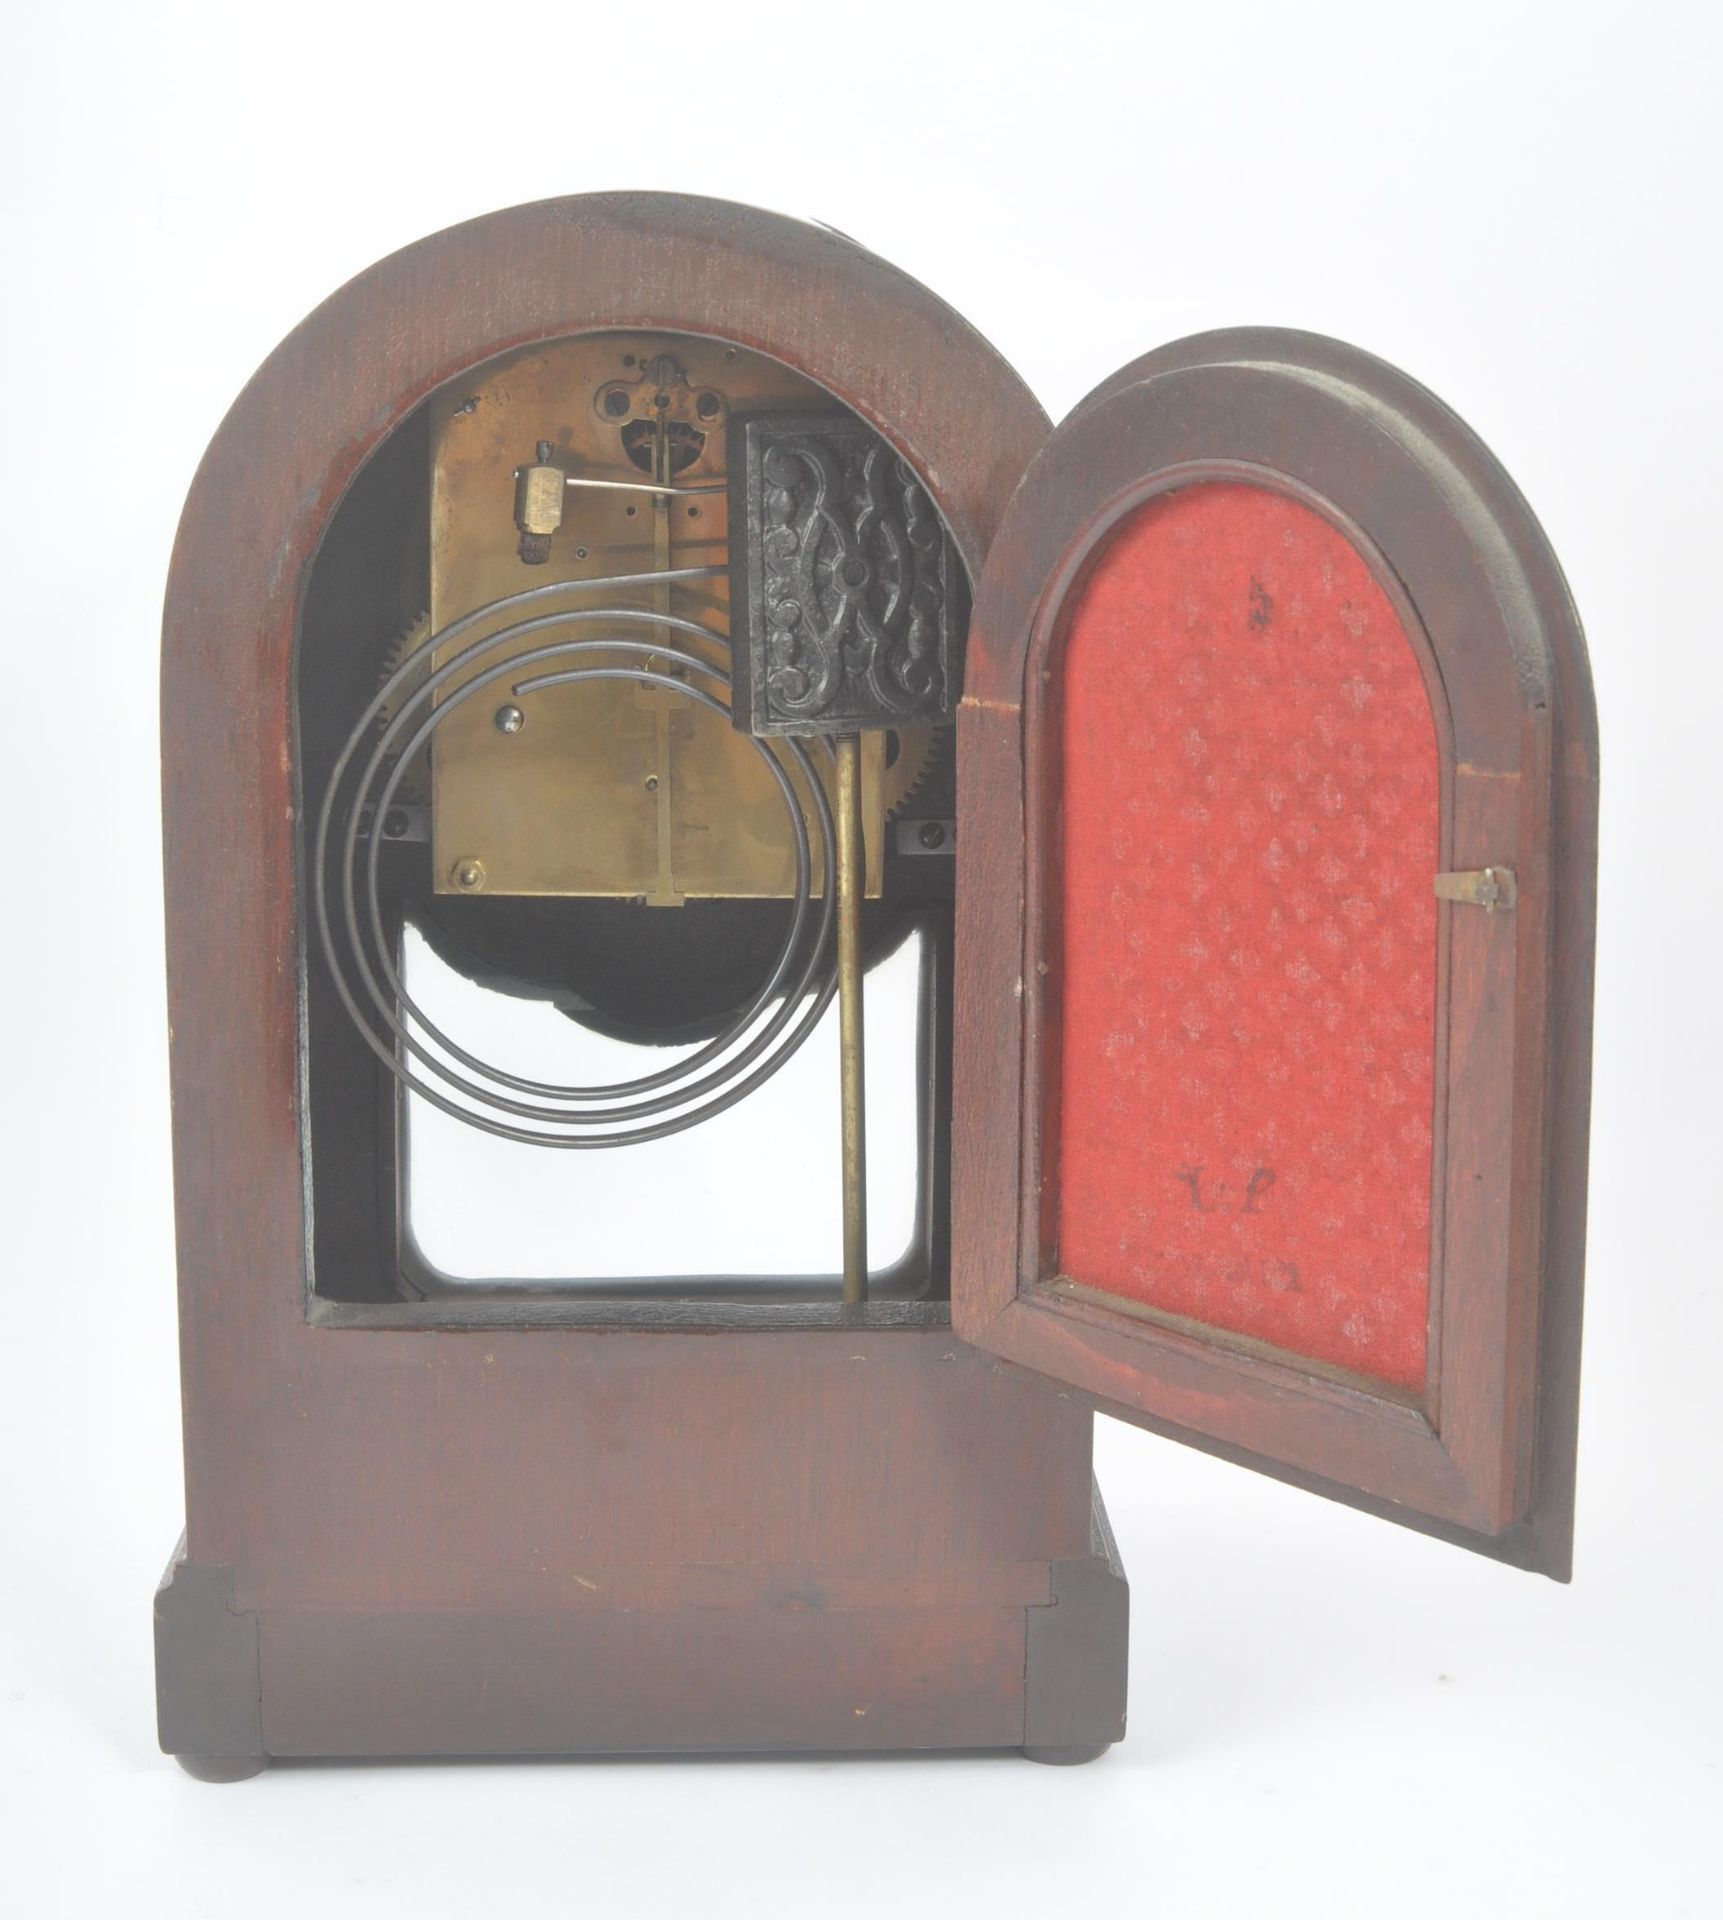 EARLY 20TH CENTURY BAKELITE 8-DAY MANTLE CLOCK - Image 4 of 5